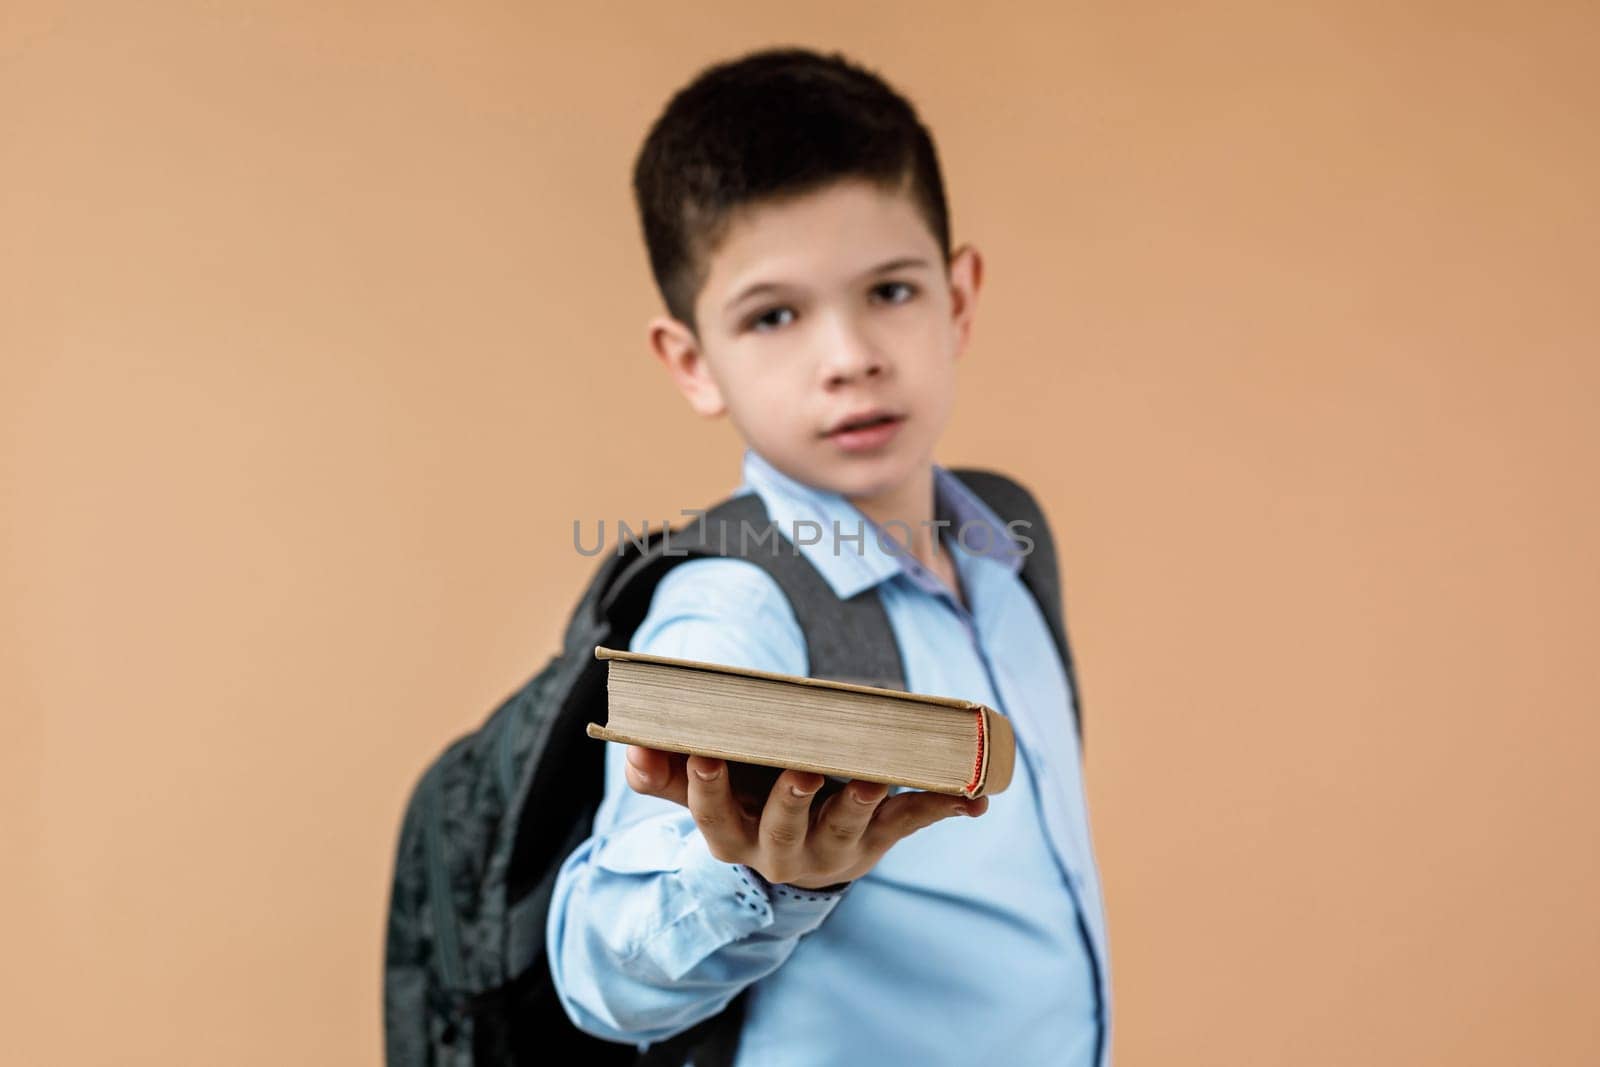 little cheerful school boy with backpack giving book over beige background. focus on book